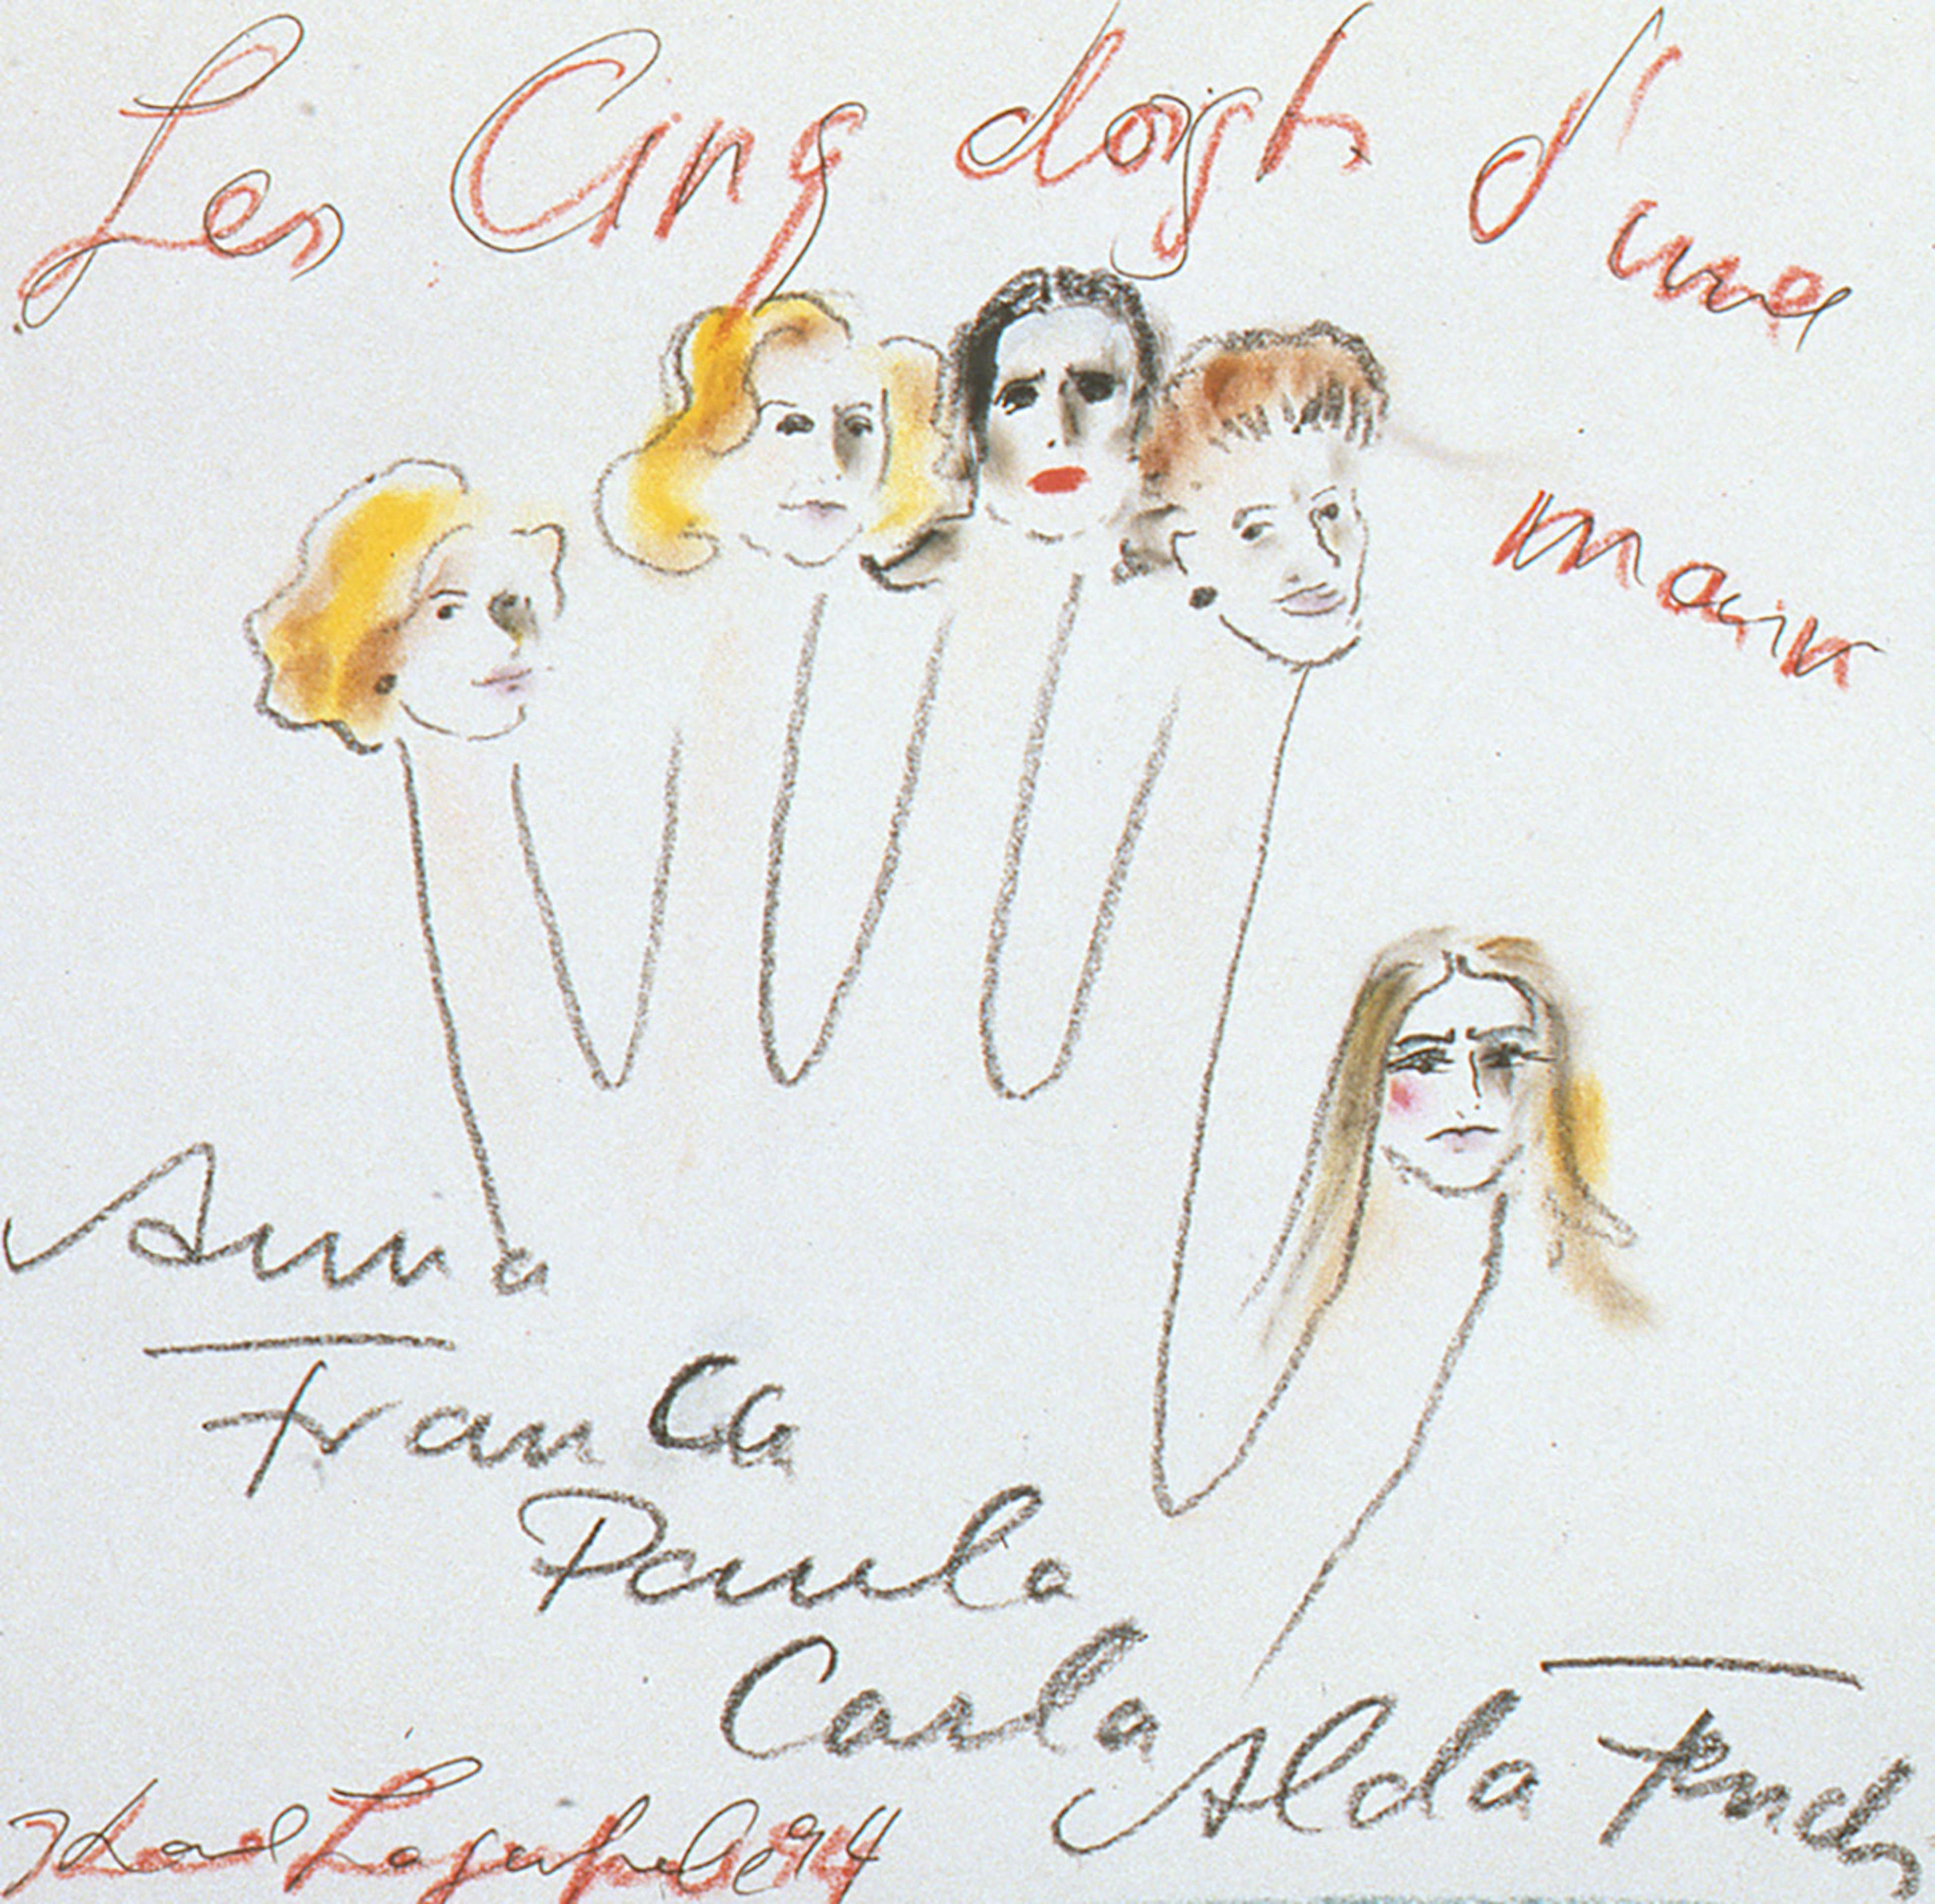 The five Fendi sisters sketched by Karl Lagerfeld as the 5 fingers of a hand © Courtesy of Fendi